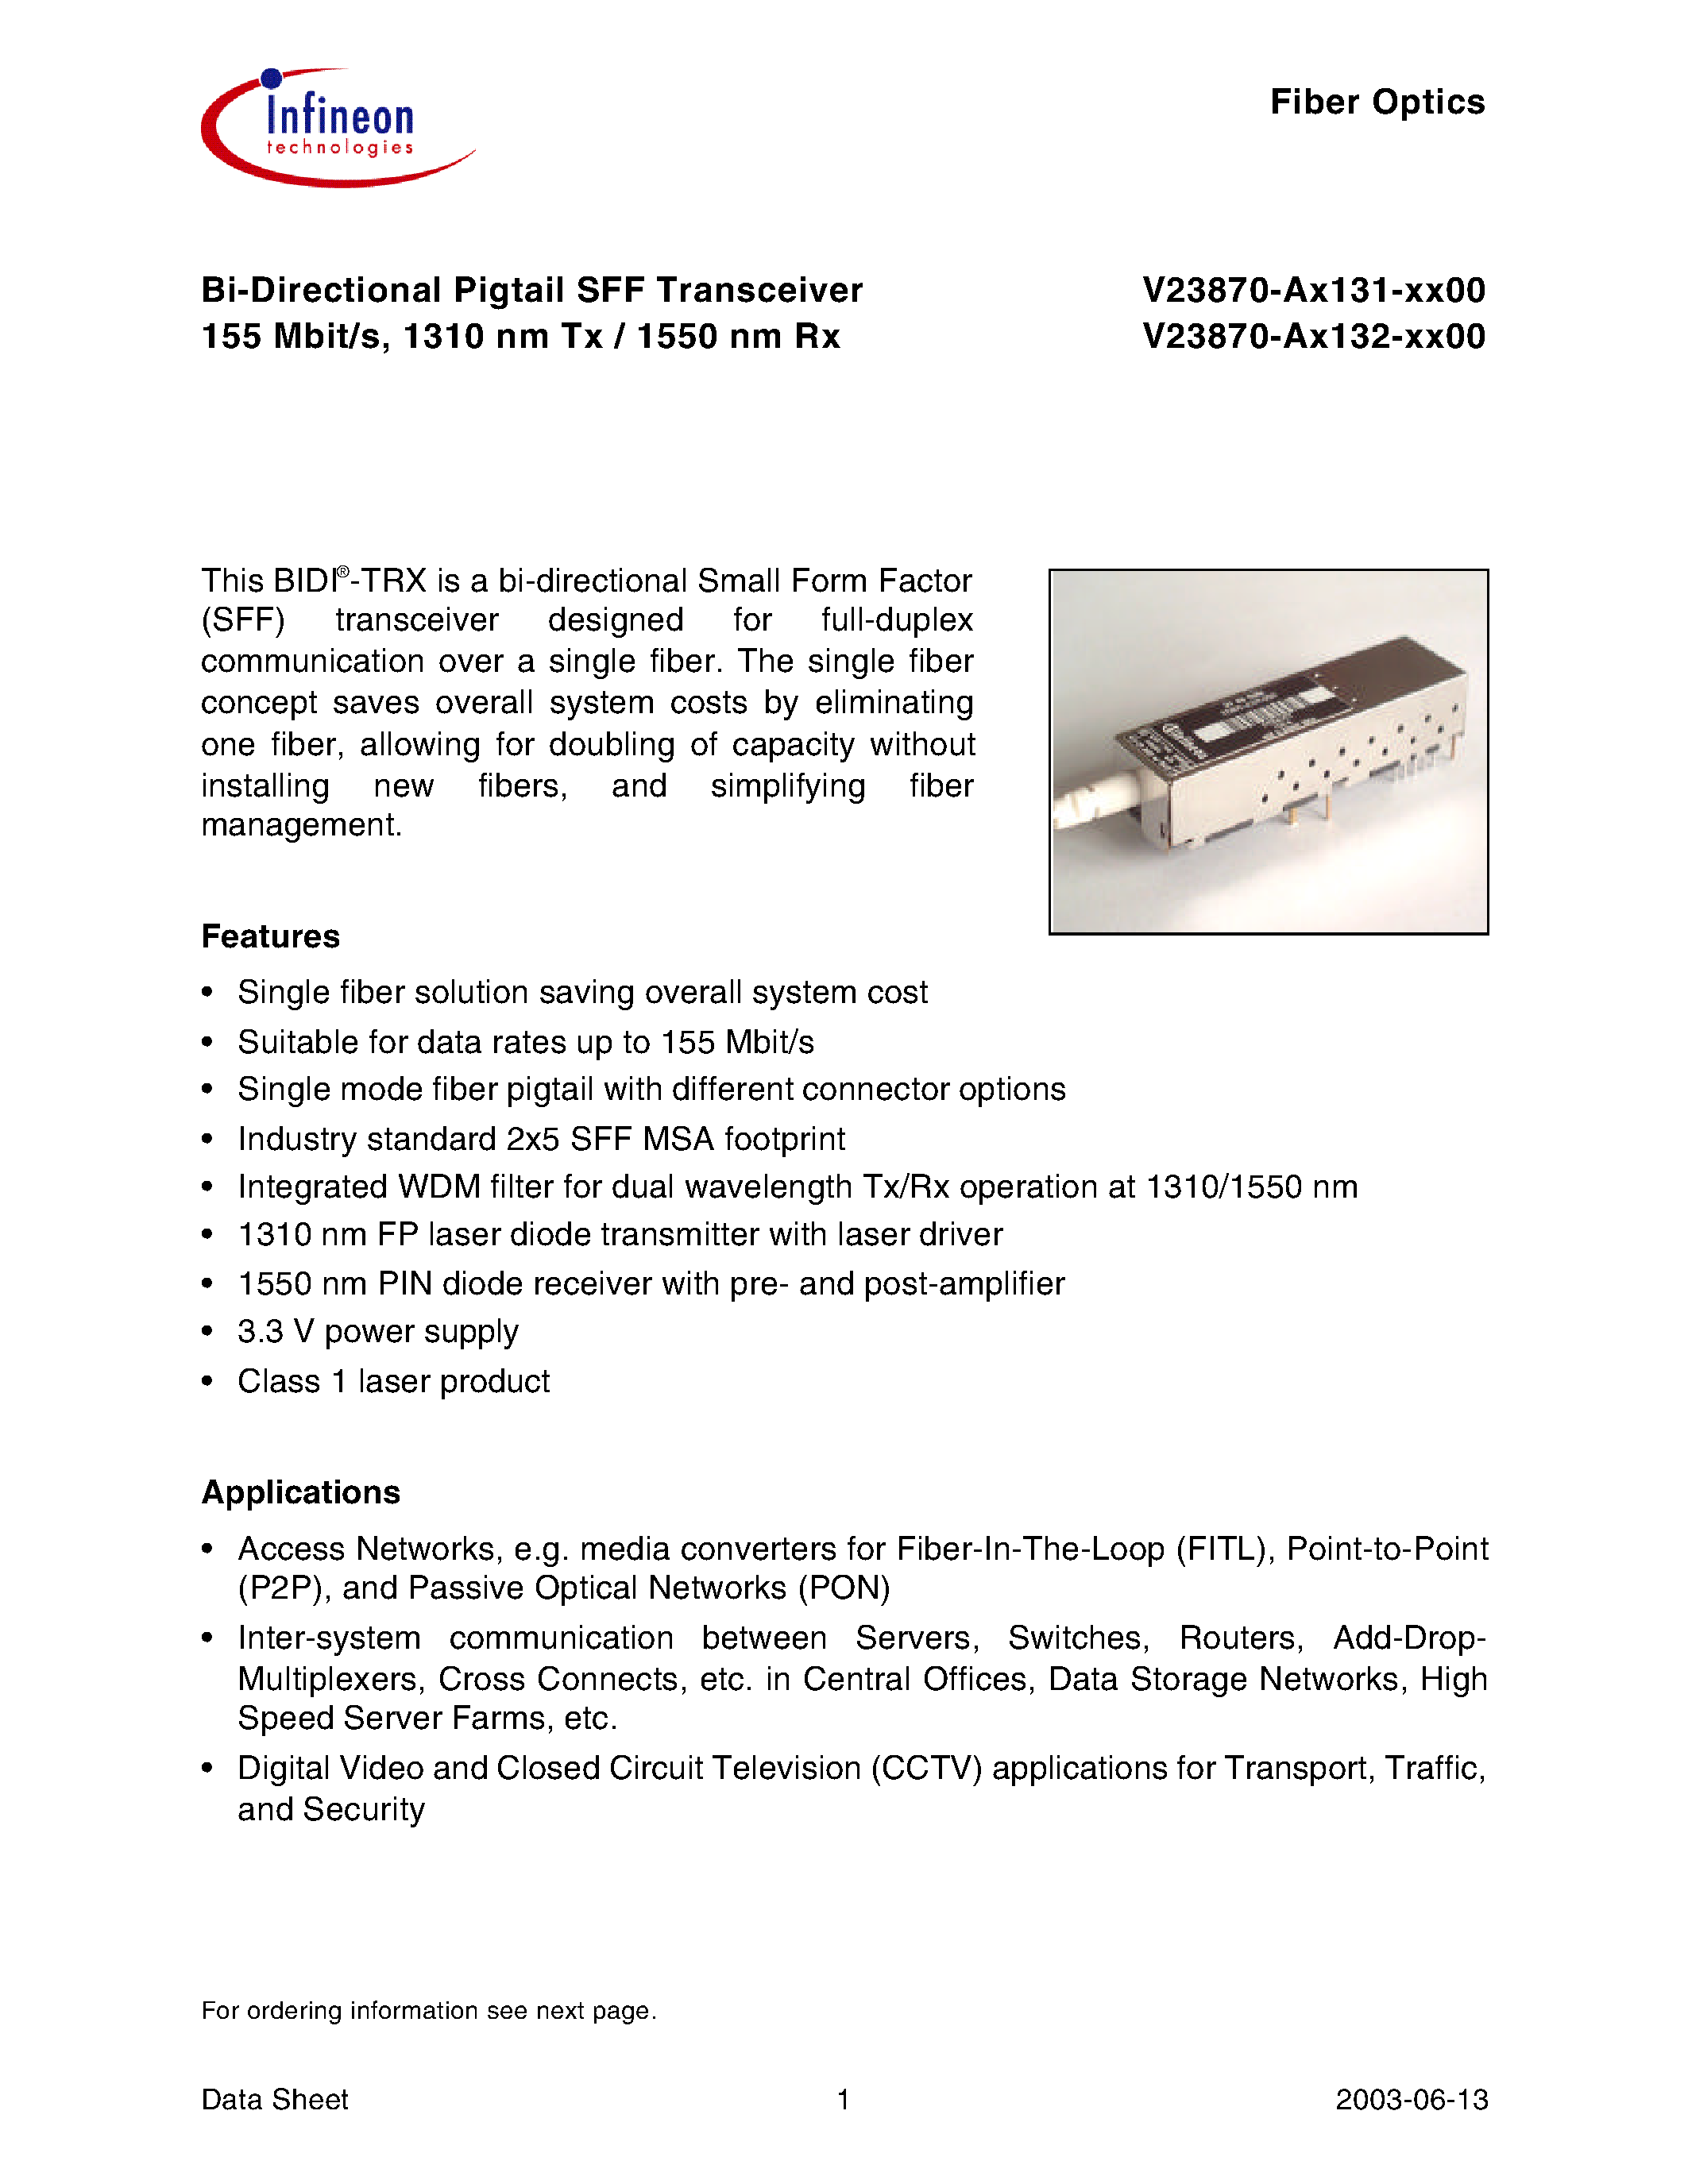 Datasheet V23870-A1132-B200 - Bi-Directional Pigtail SFF Transceiver 155 Mbit/s/ 1310 nm Tx / 1550 nm Rx page 1